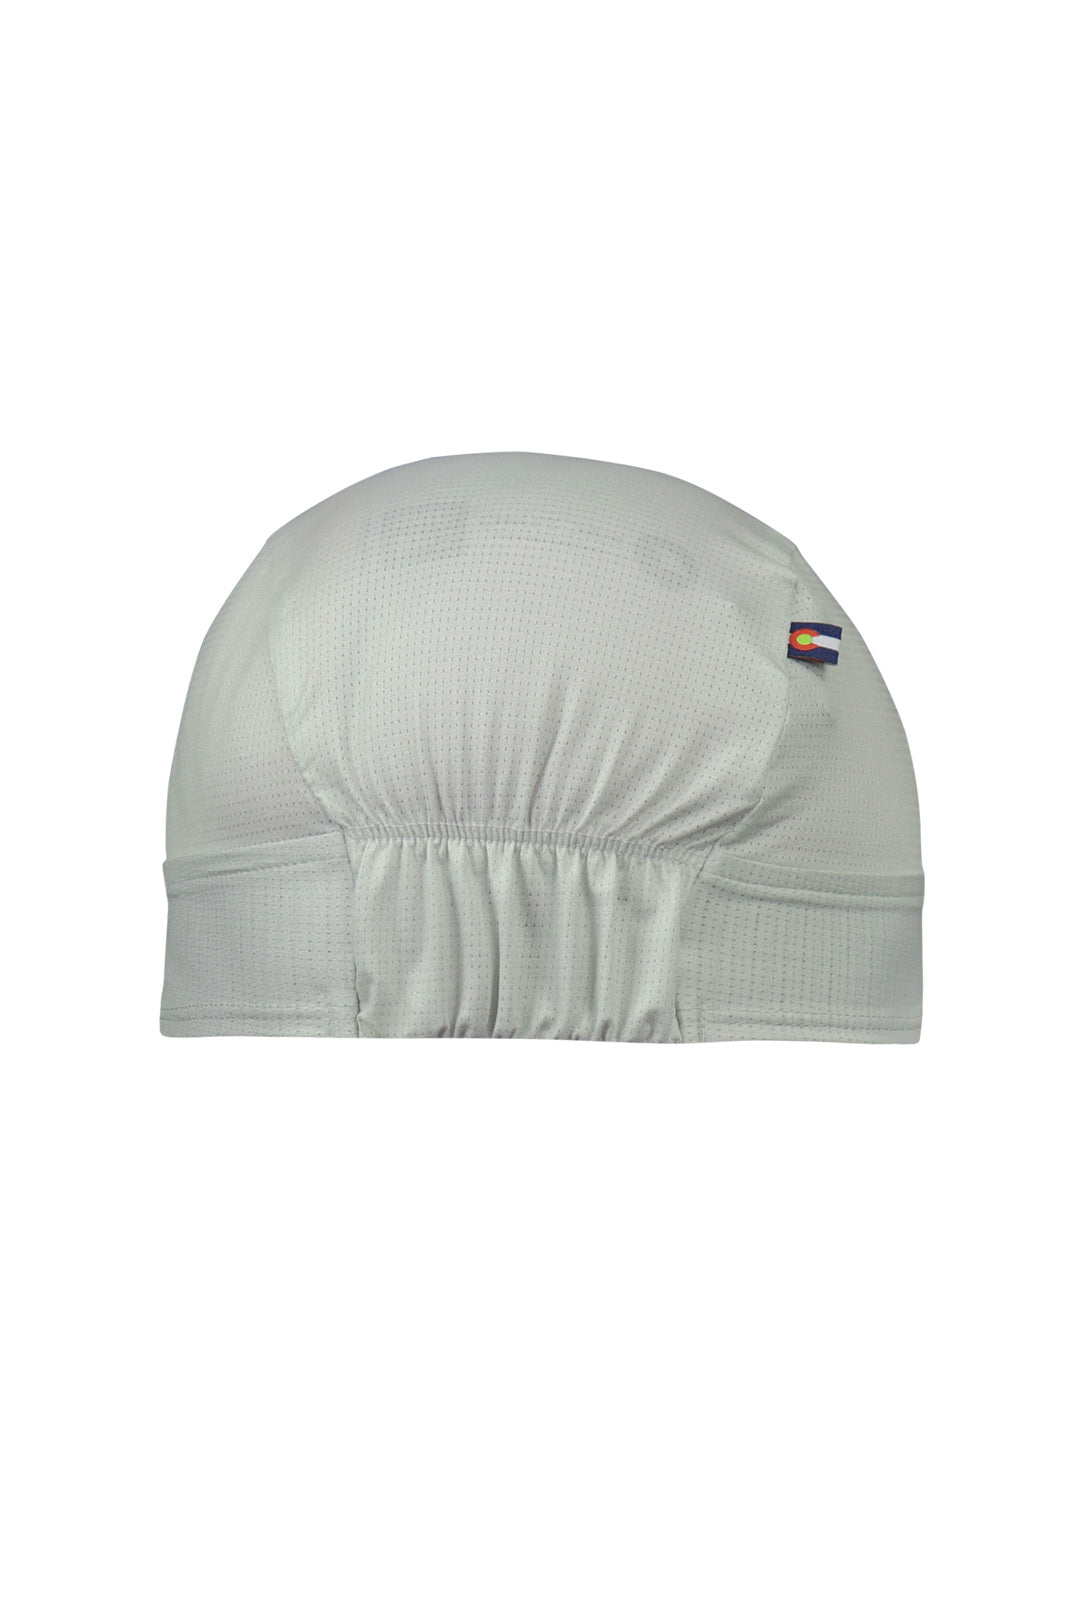 White Cycling Summer Skull Cap - Back View